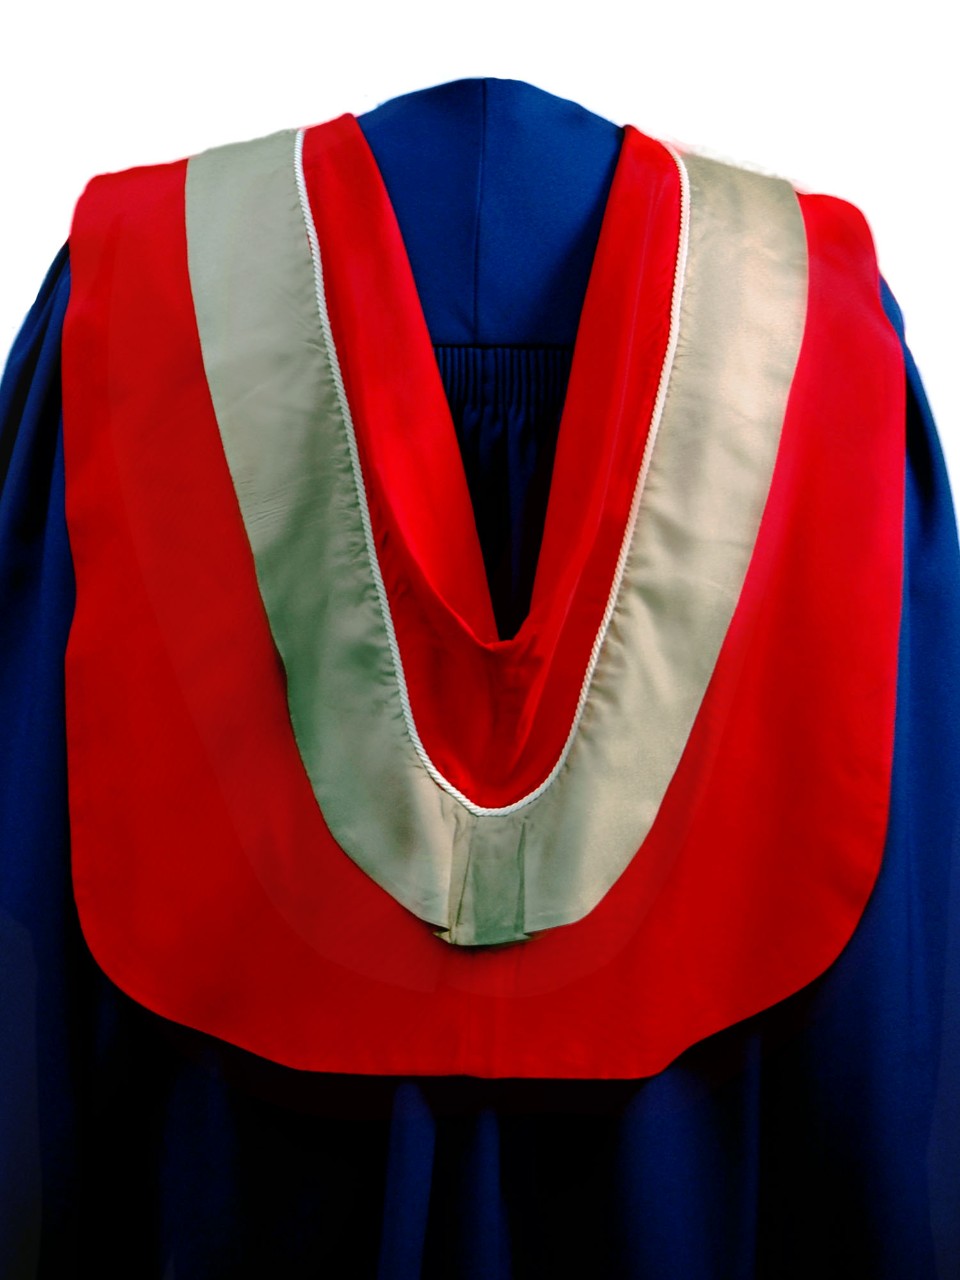 The Master of Science in the Faculty of Applied Science hood is red with wide fawn border and white cording